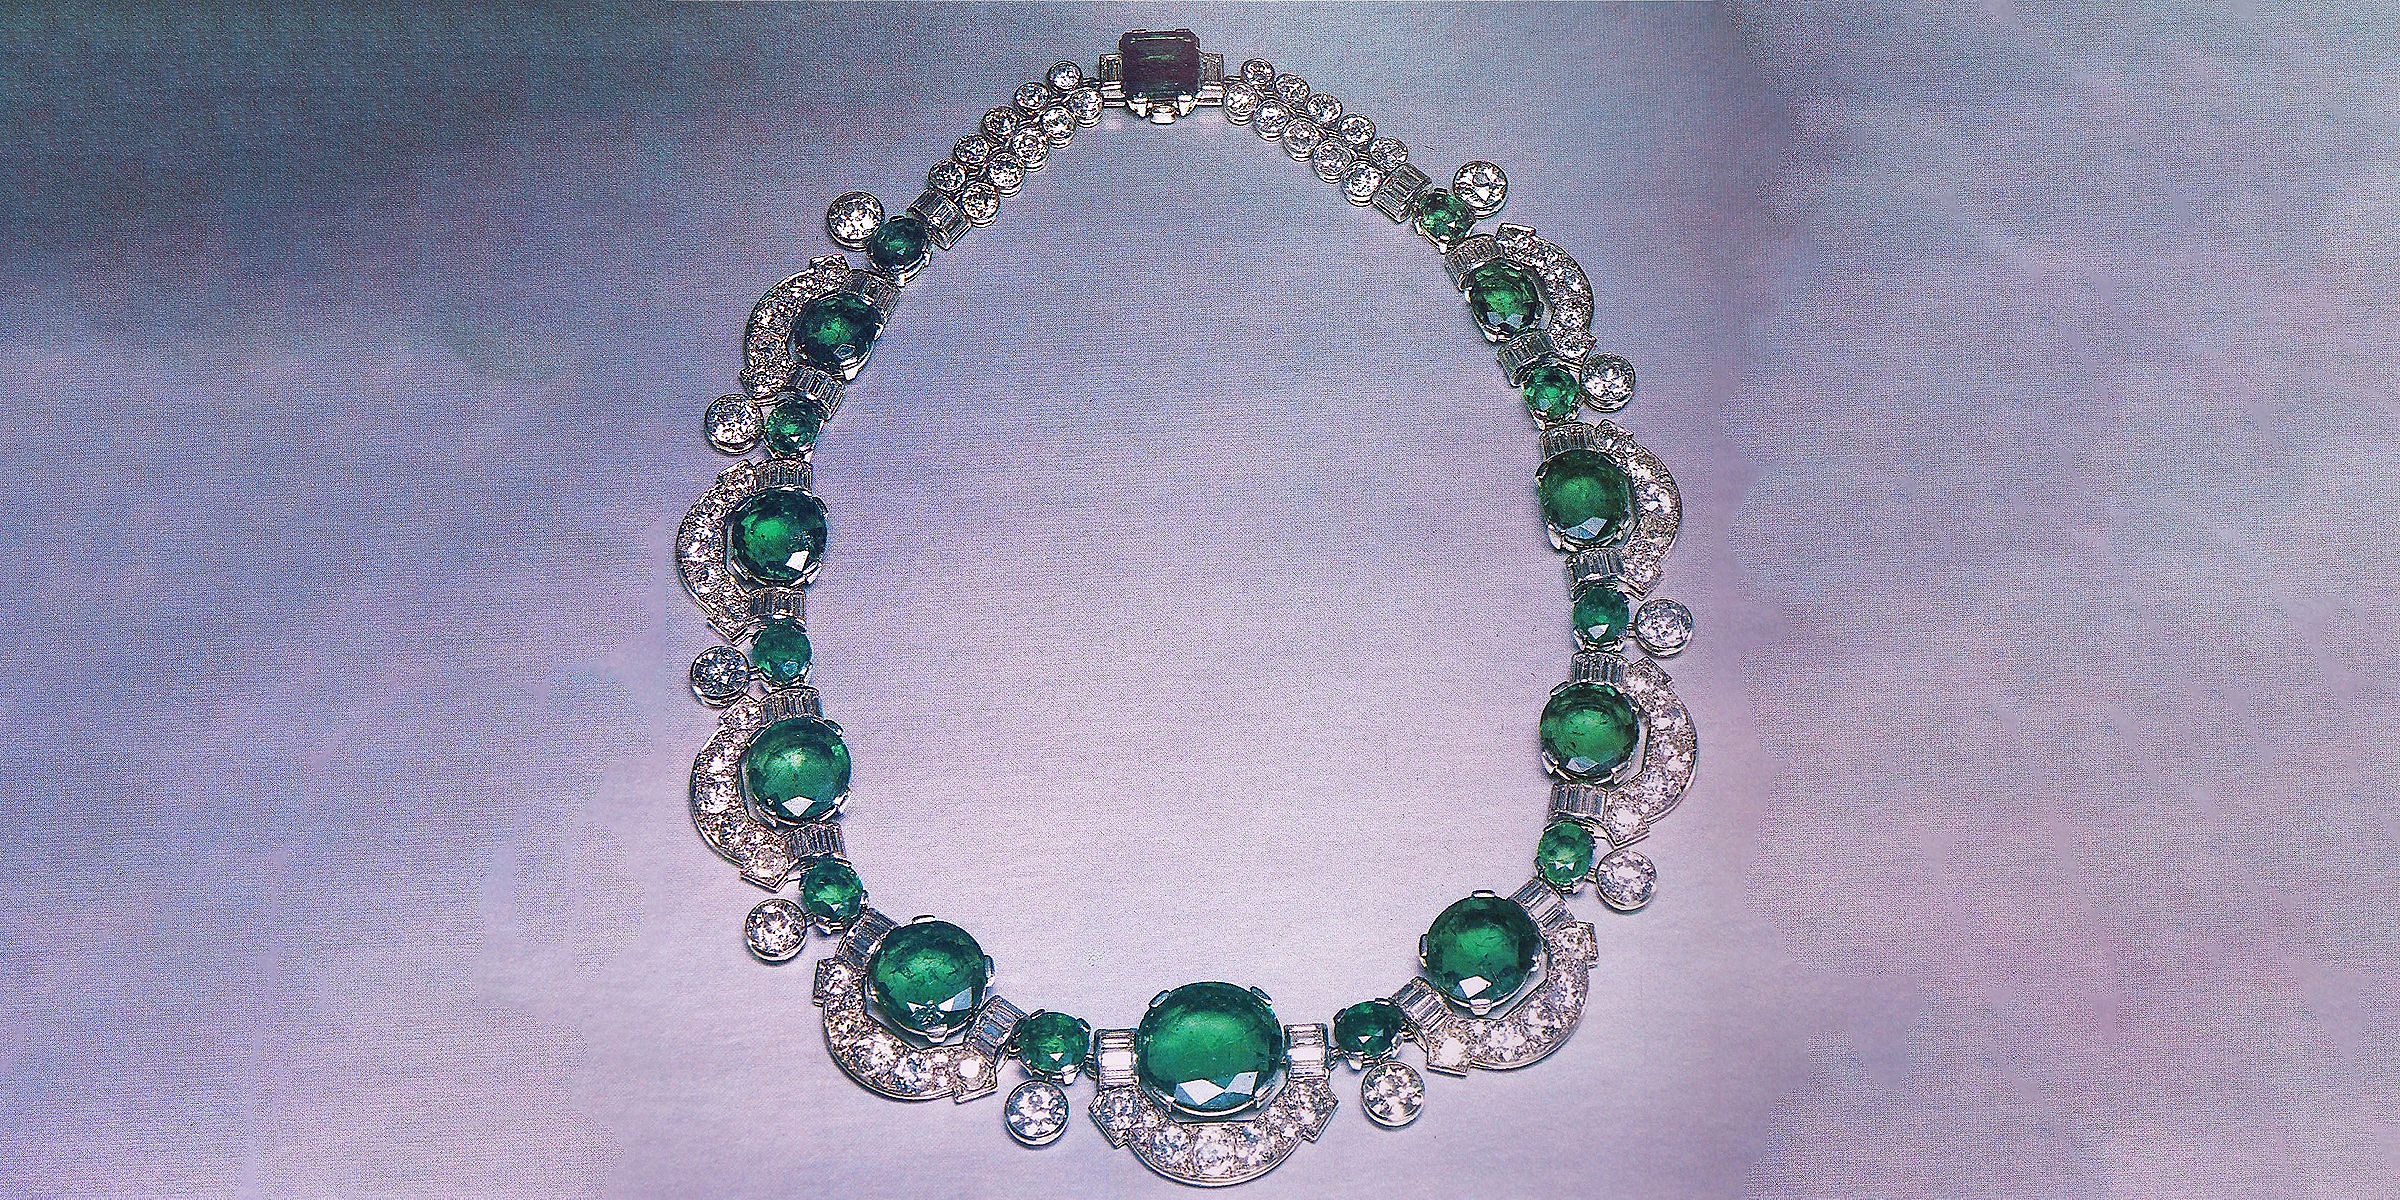 Emerald Necklace | Source: flickr.com/(CC BY-ND 2.0) by Clive Kandel